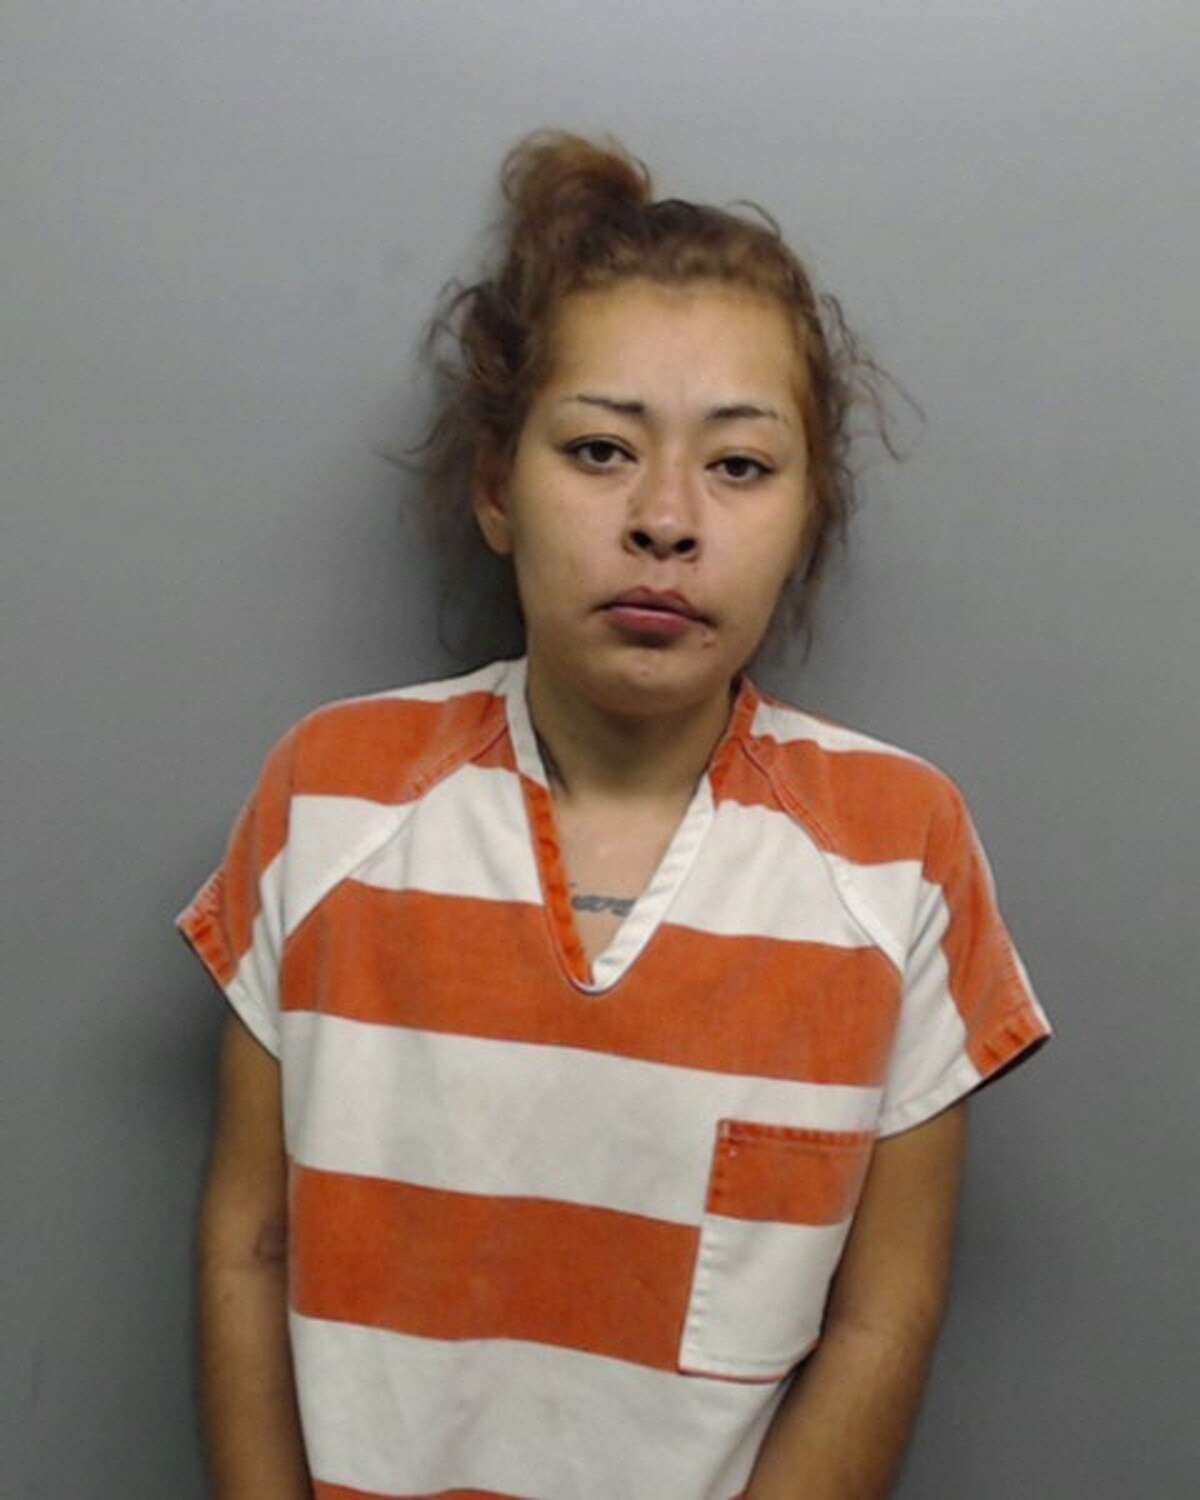 Maria de Jesus Villa, 27, was charged with assault.